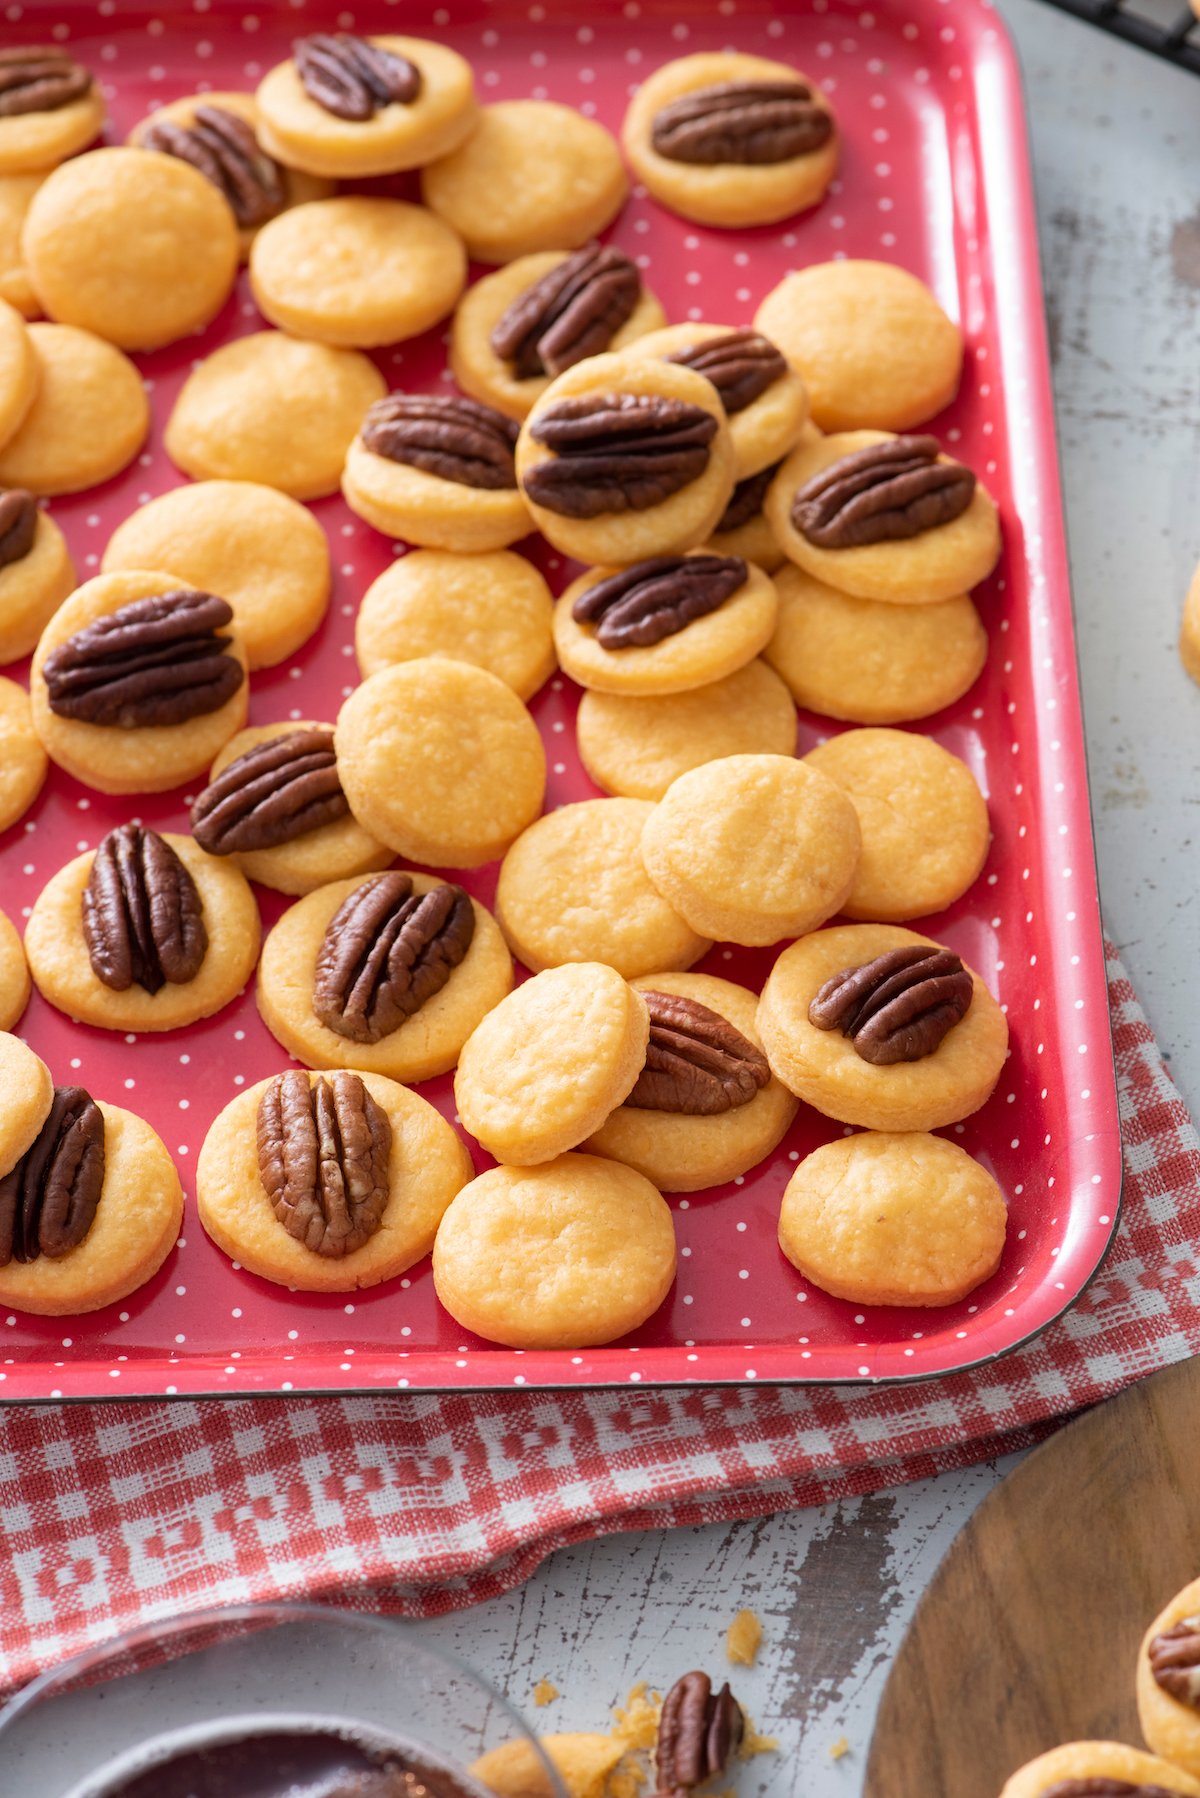 Cheese Wafers topped with pecans.